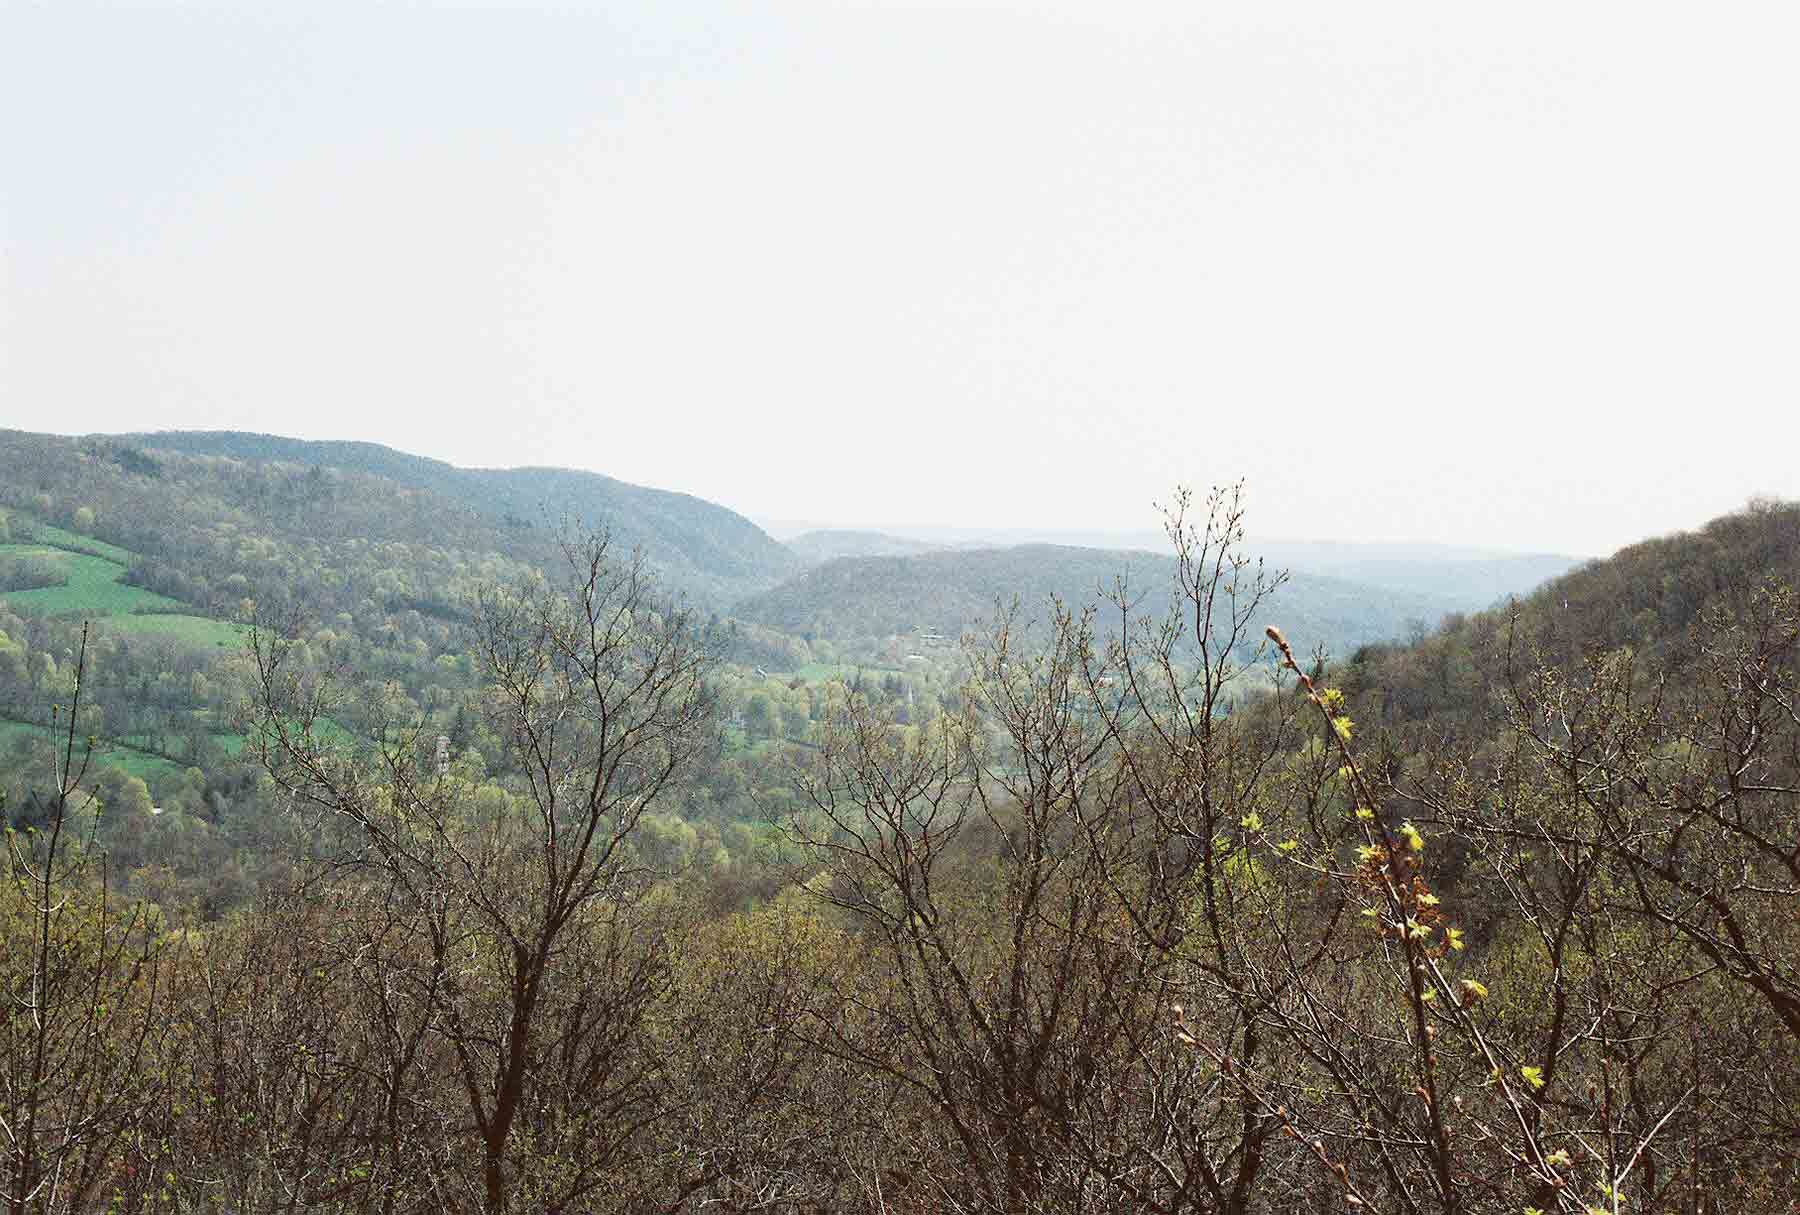 mm 7.6 - View to south towards Kent. I beleive it is from Calebs Peak.  Courtesy dlcul@conncoll.edu